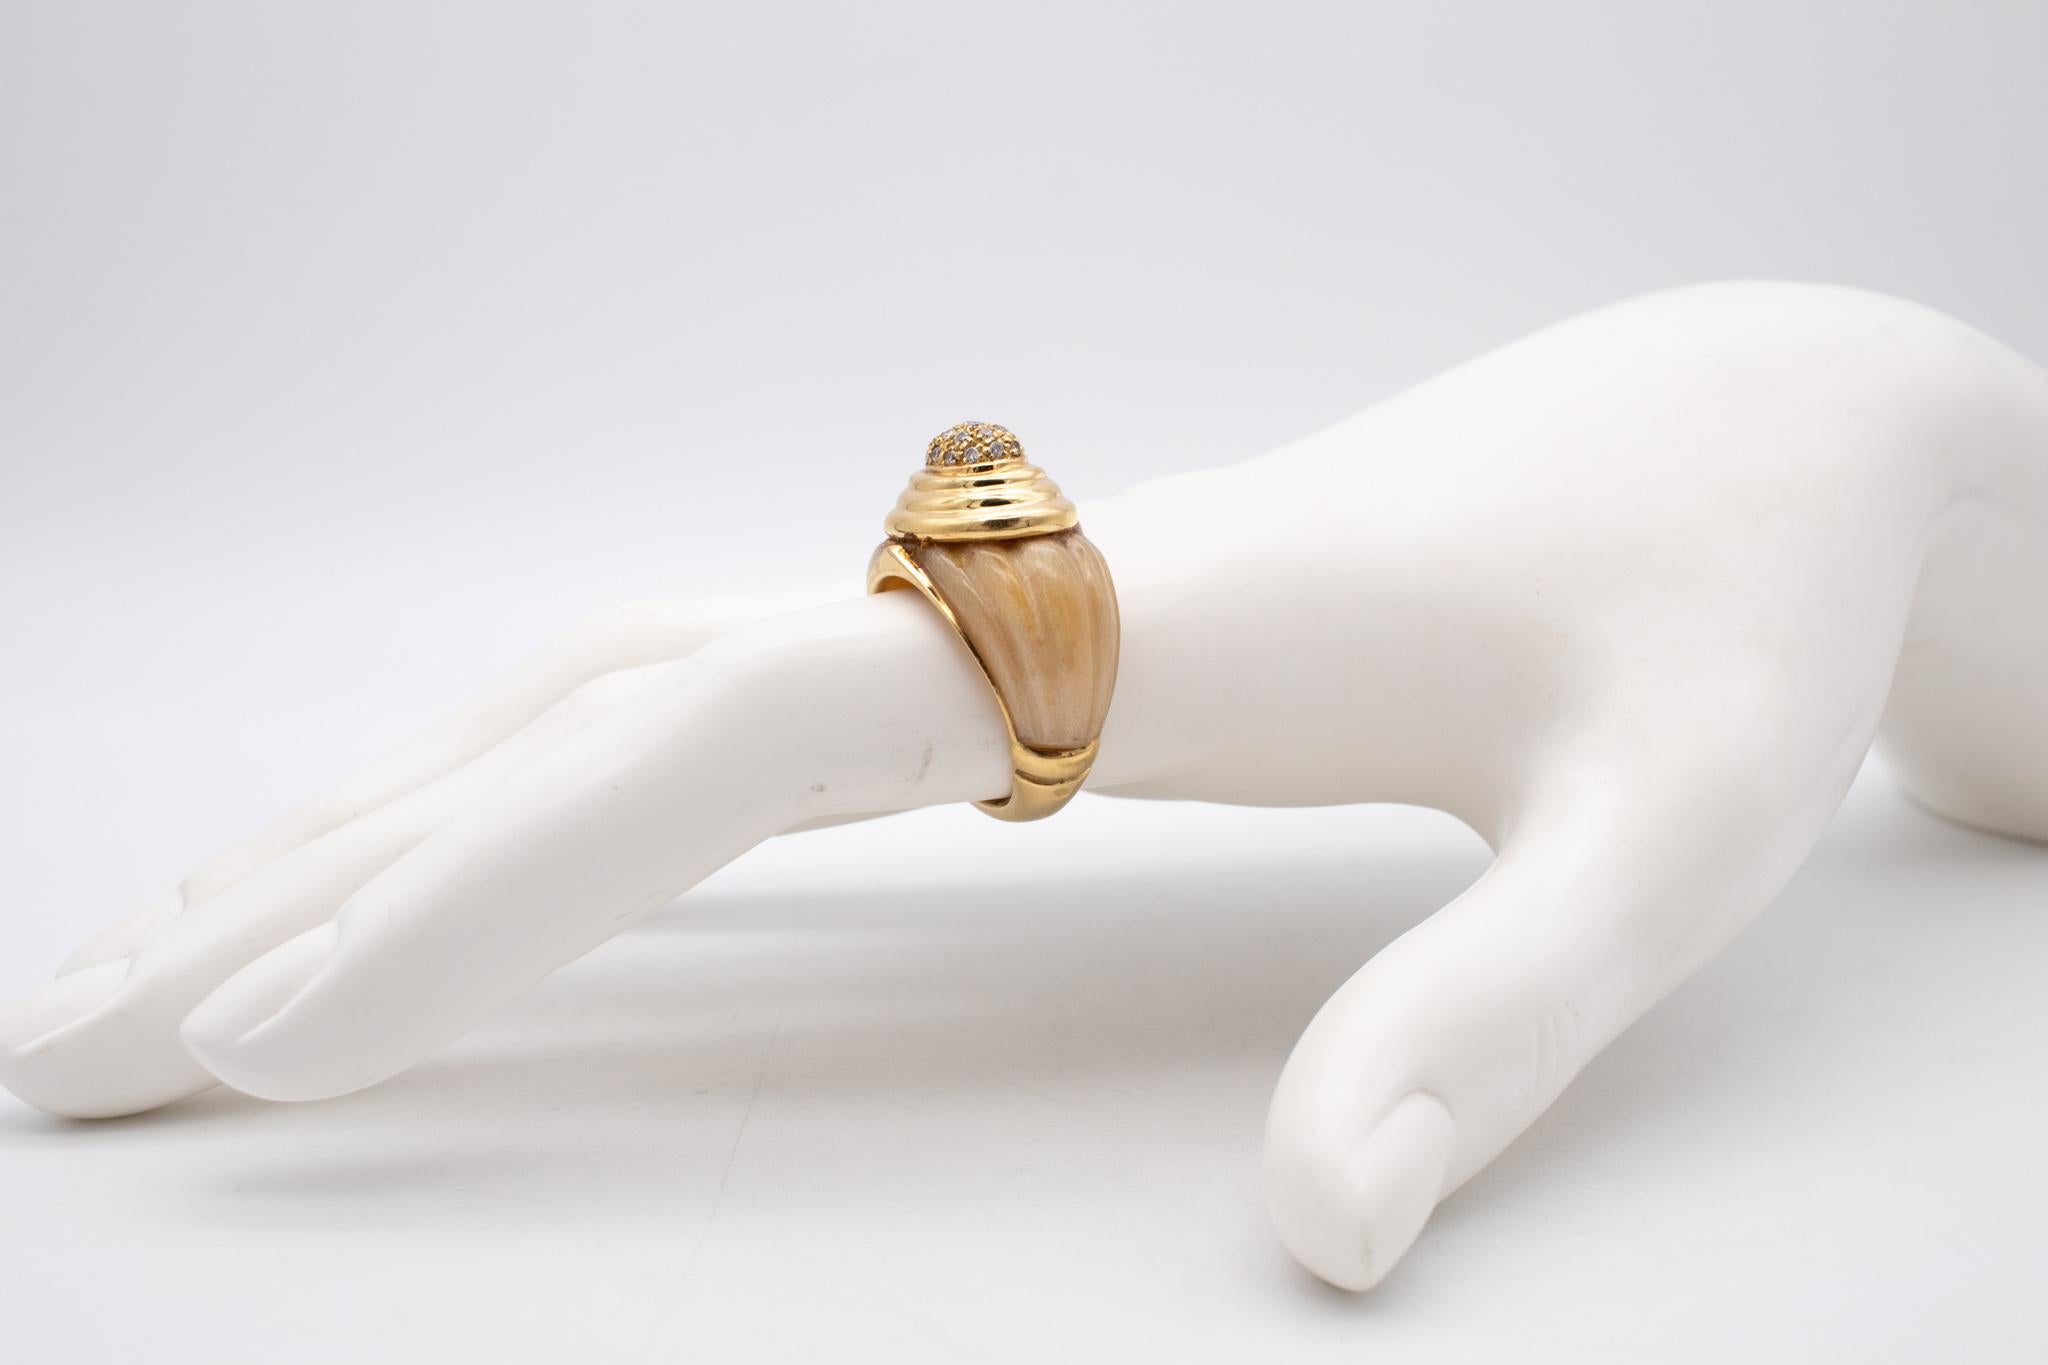 French 1960 Art Deco Retro Bakelite Cocktail Ring in 18Kt Gold with Diamonds 2